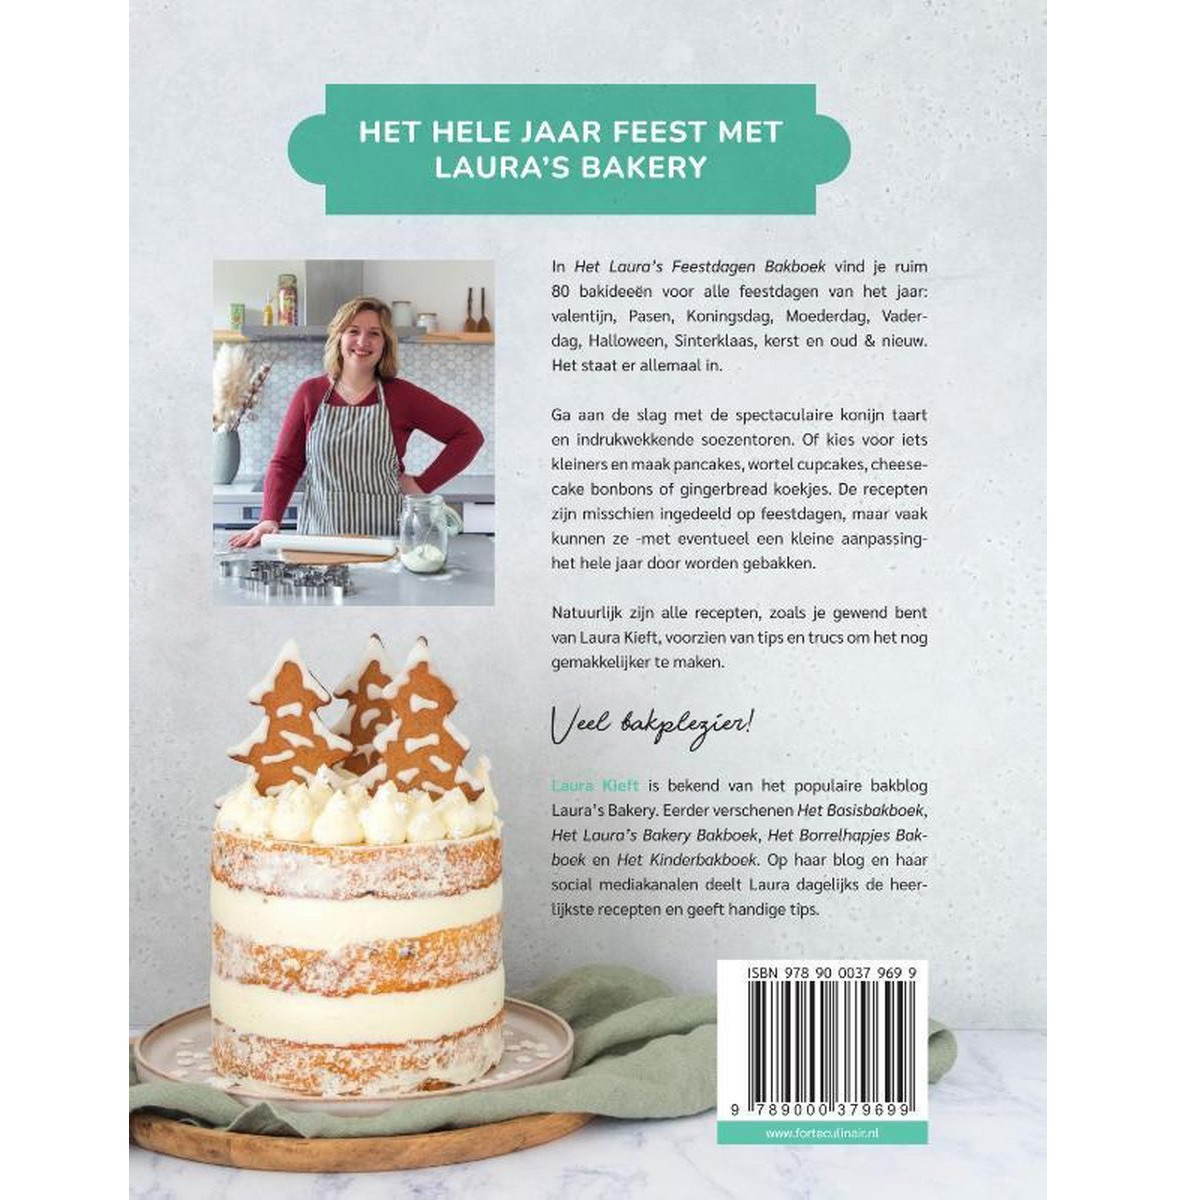 Book: The Laura's Bakery Holiday Baking Book